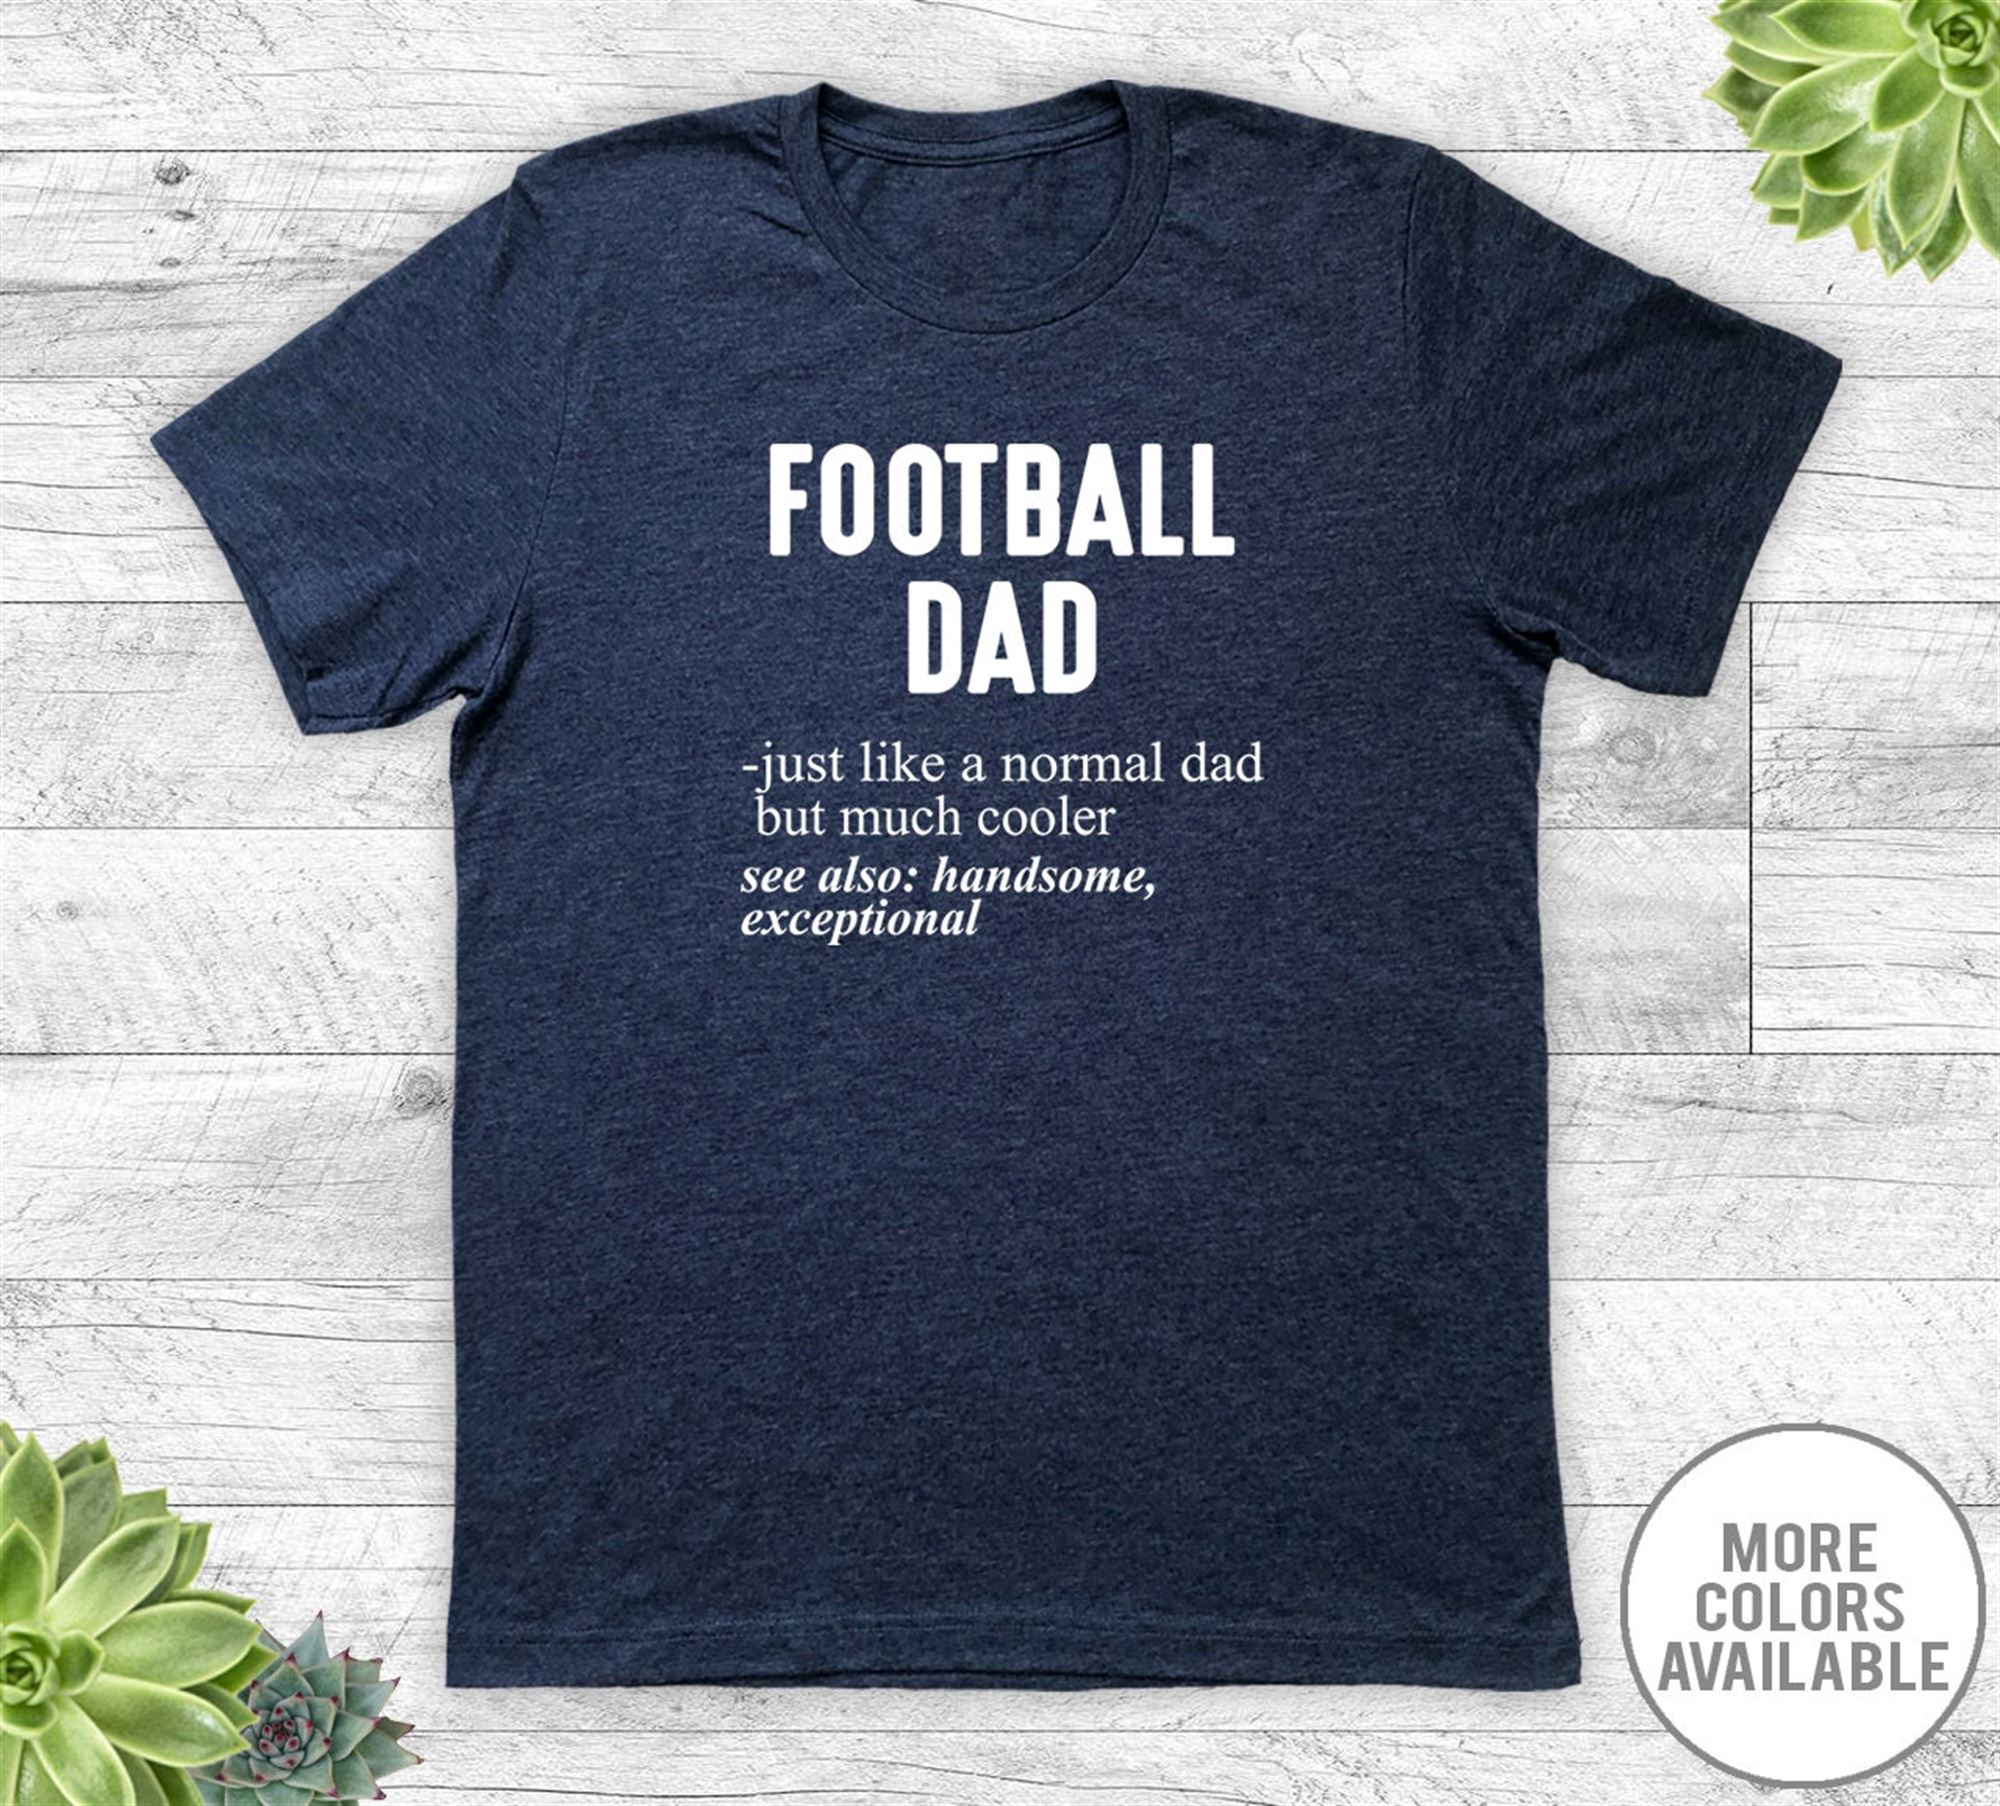 Amazing Football Dad Just Like A Normal Dad - Unisex T-shirt - Football Dad Shirt - Football Dad Gift 